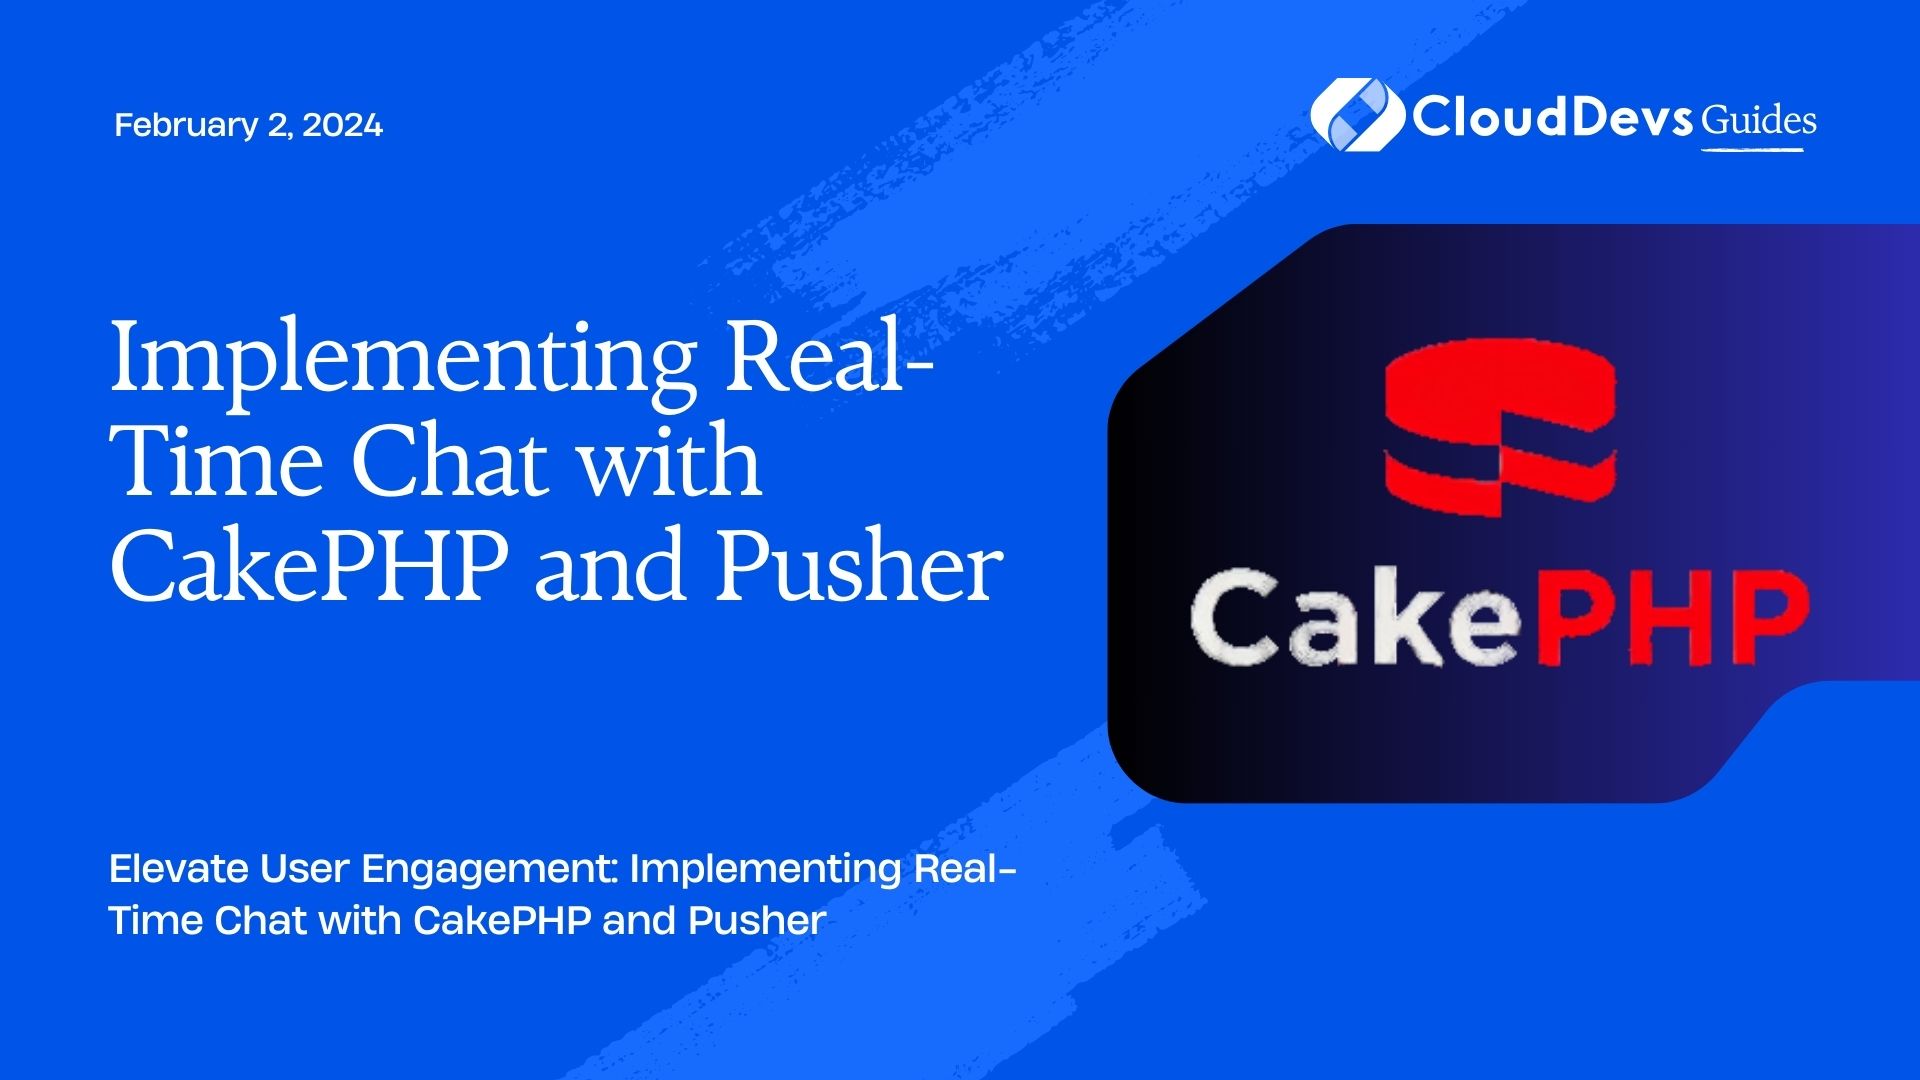 Implementing Real-Time Chat with CakePHP and Pusher